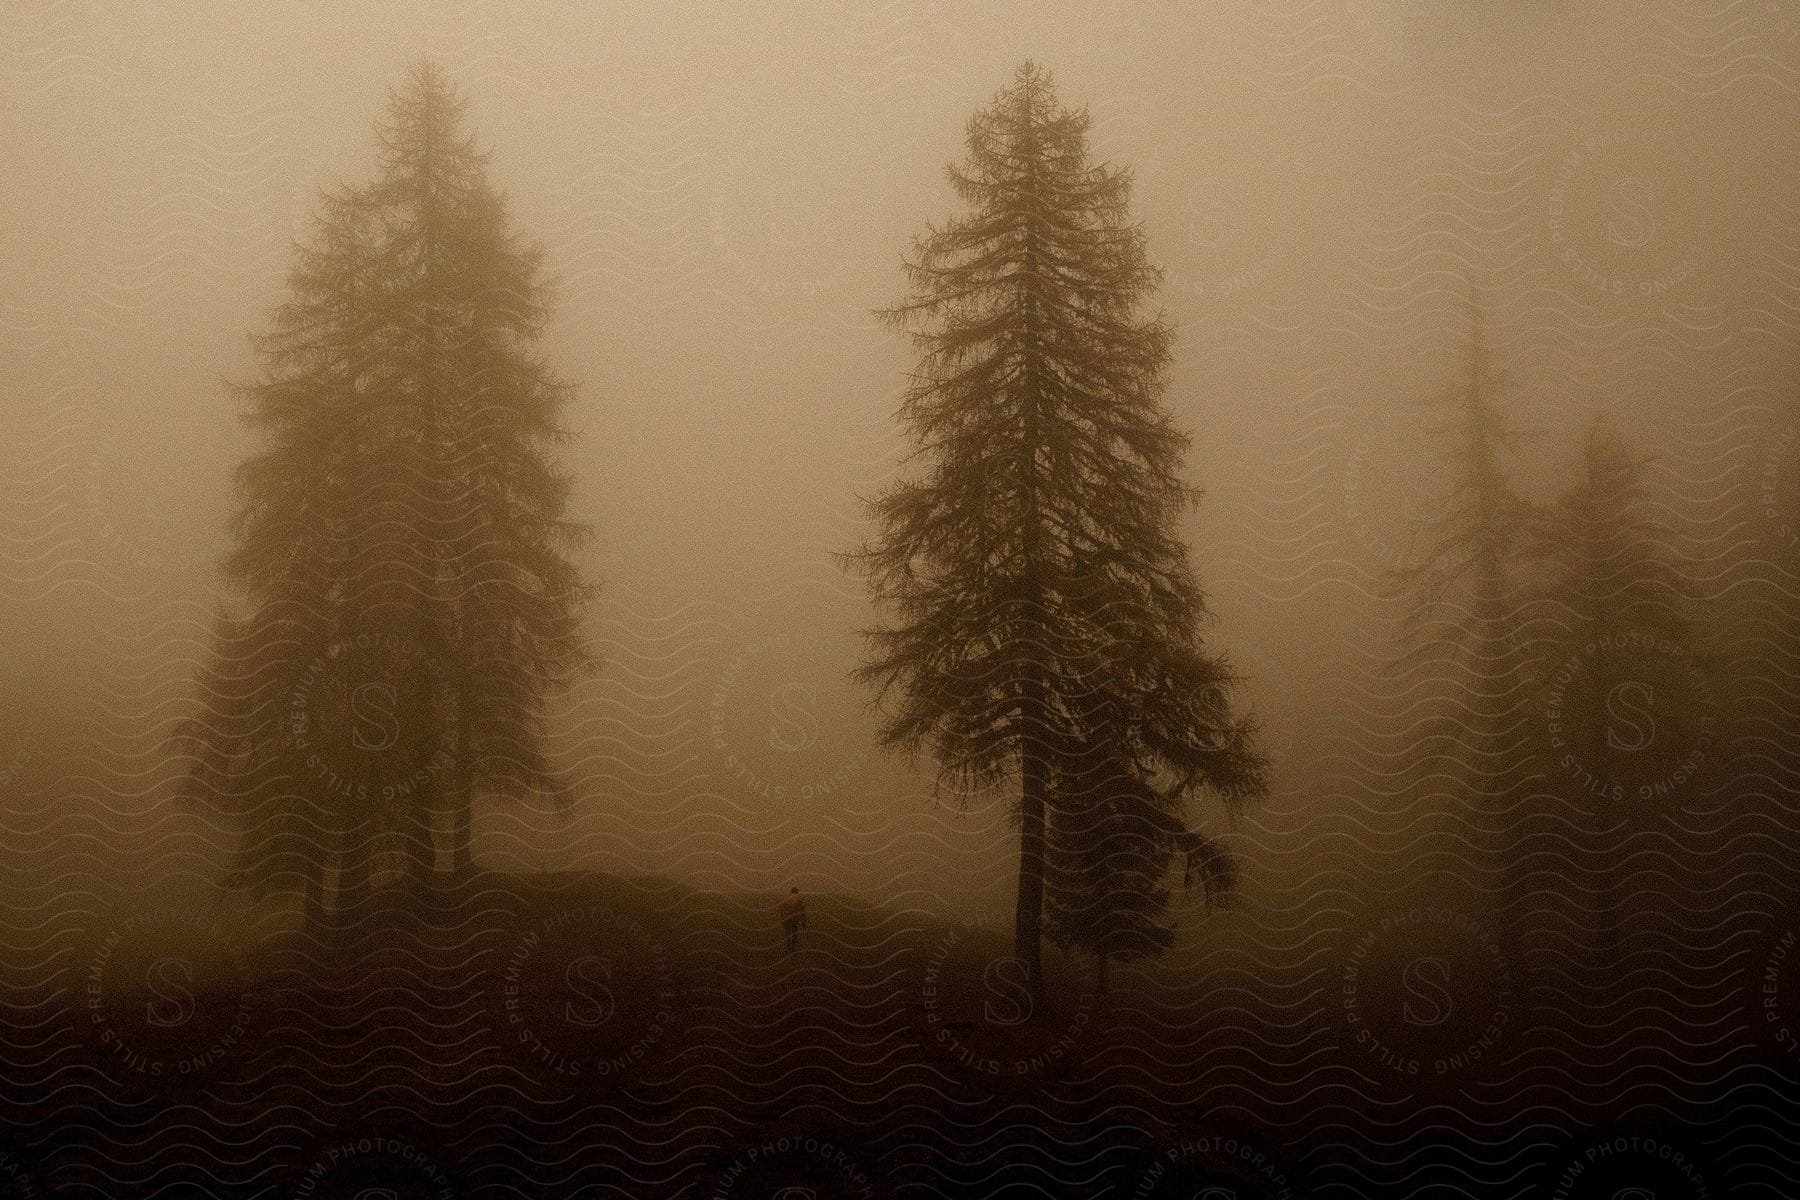 fog covering the forest as trees are faintly seen during sundown